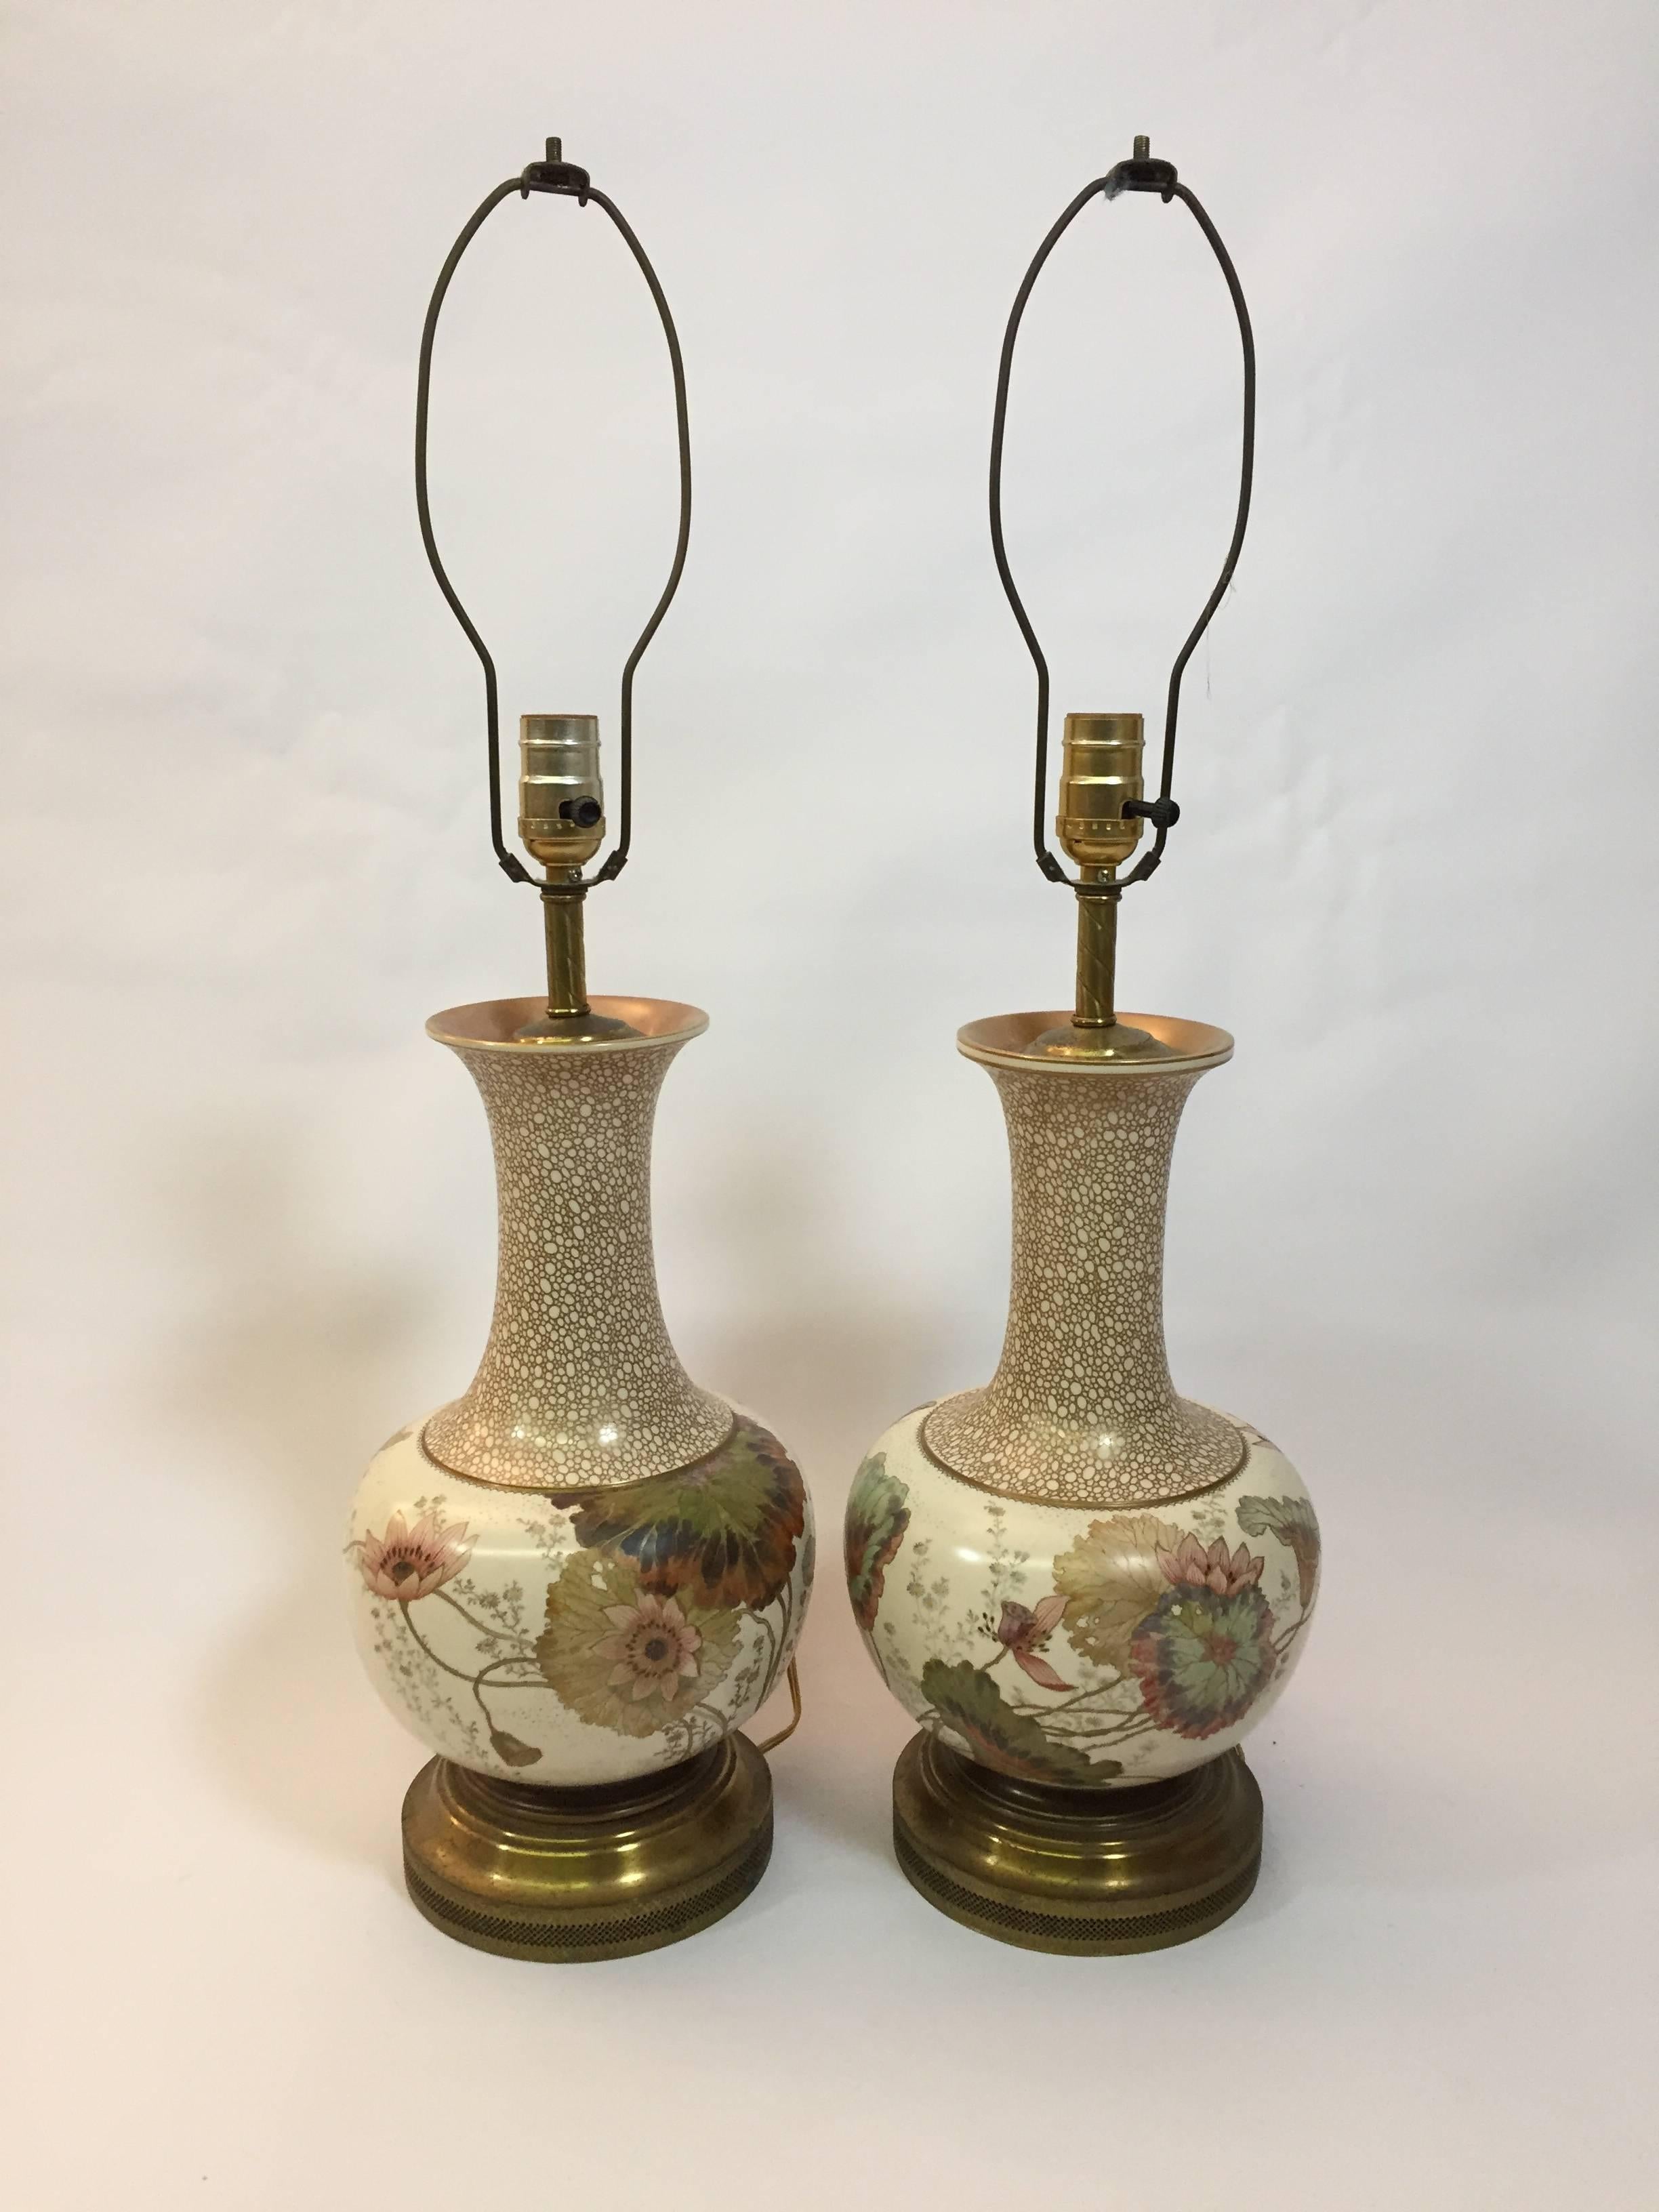 Amazing pair of hand decorated Art Nouveau Royal Doulton Burslem porcelain lamps. Fully signed on the underside and professionally drilled and mounted lamps. After extensive research, the hand-painted monogram is yet to be attributed to one